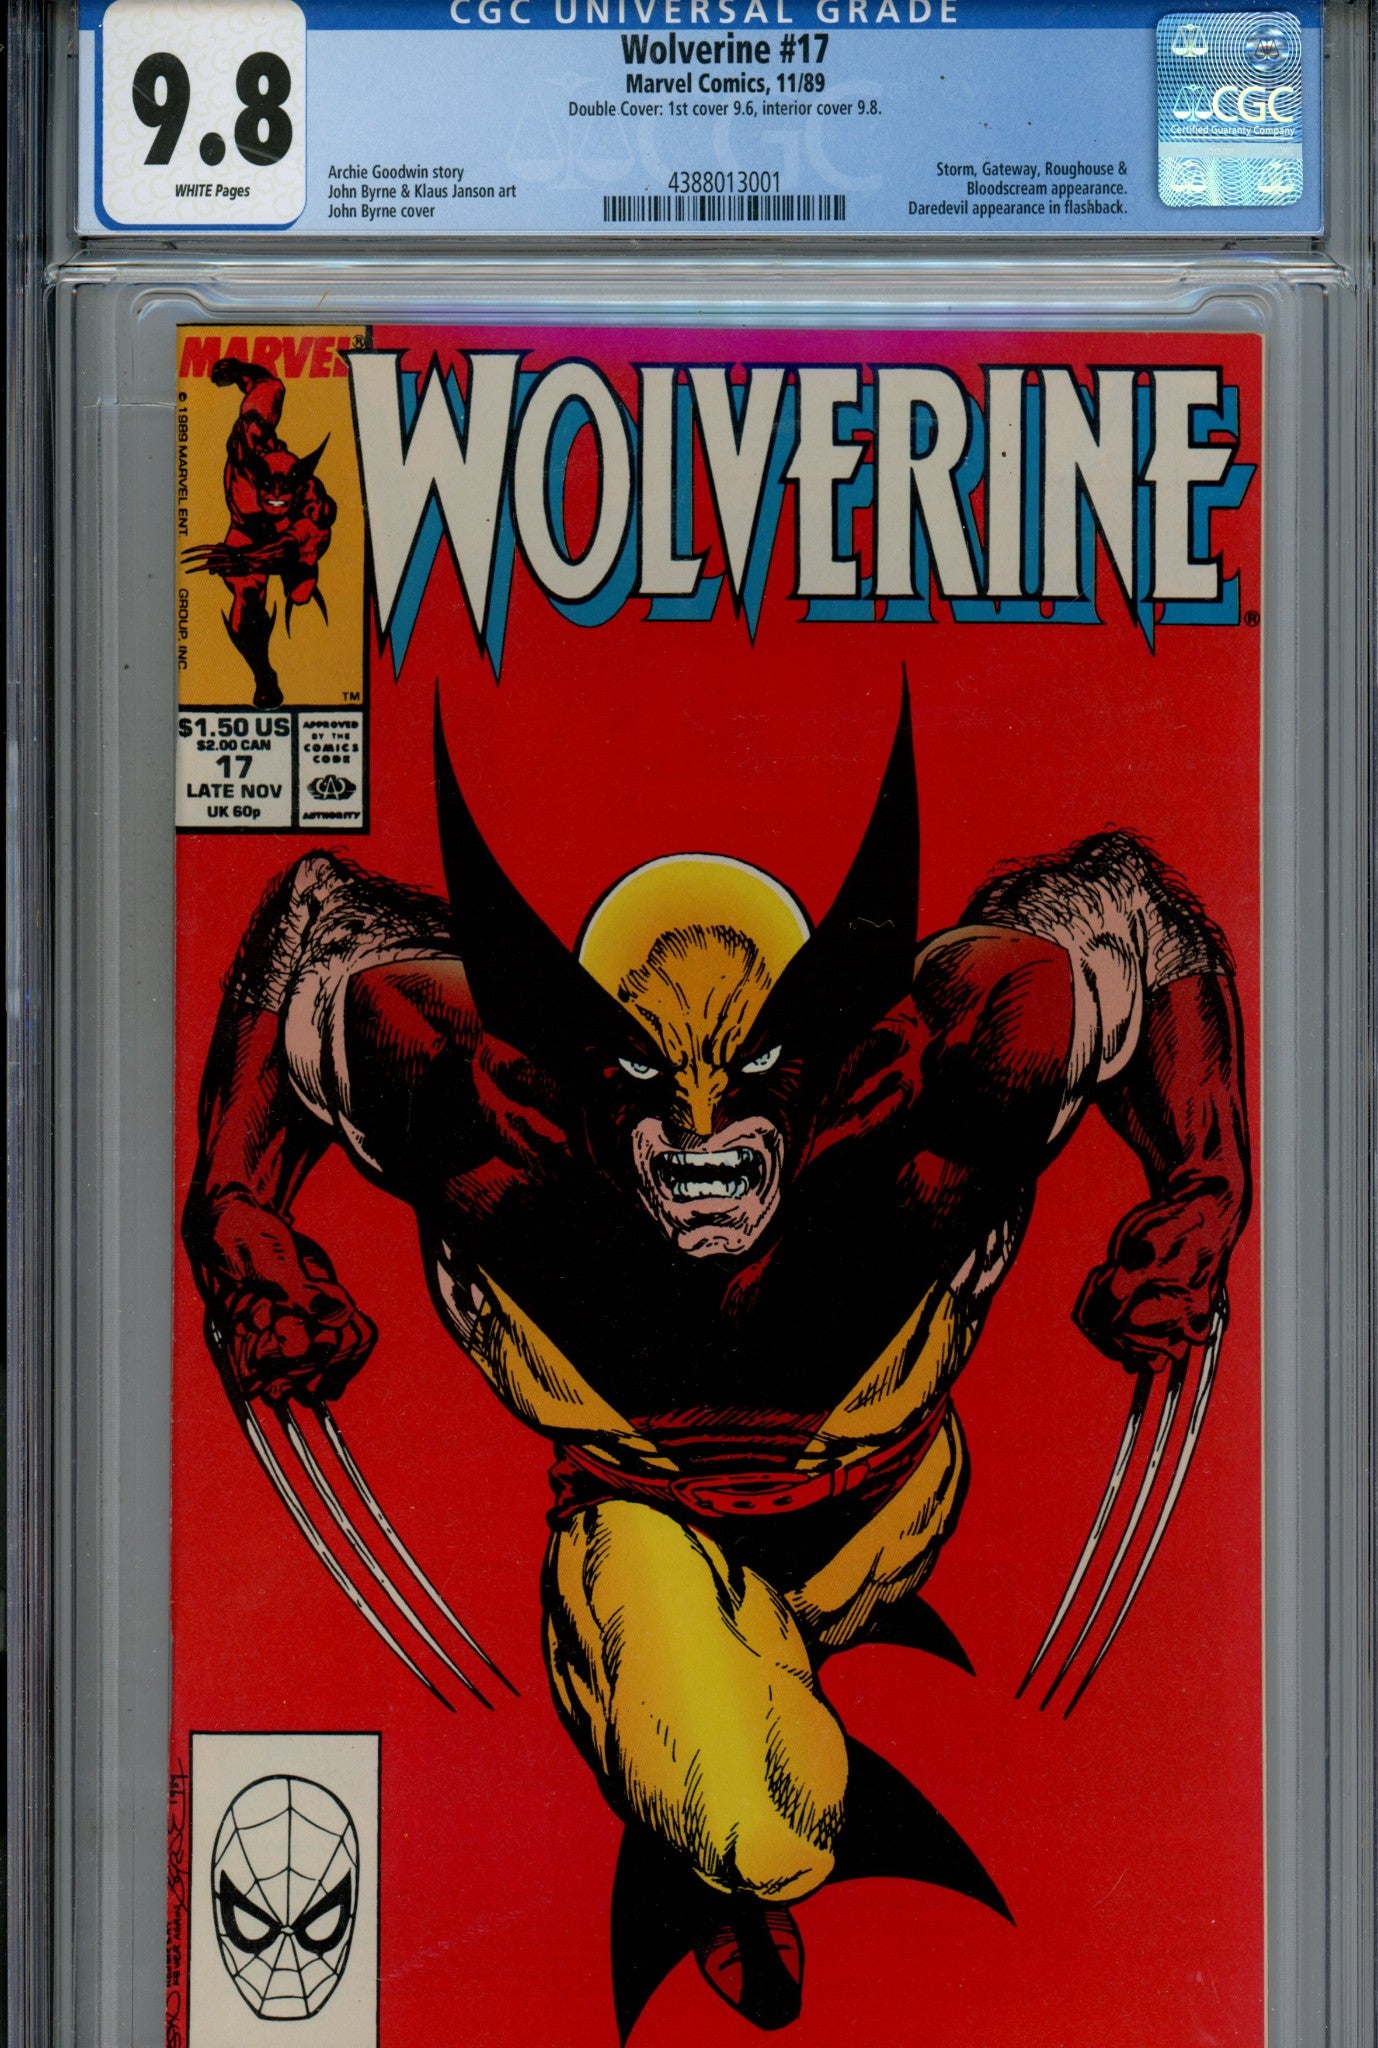 Wolverine Vol 2 17 CGC 9.8 (NM/M) Double Cover (1989) 